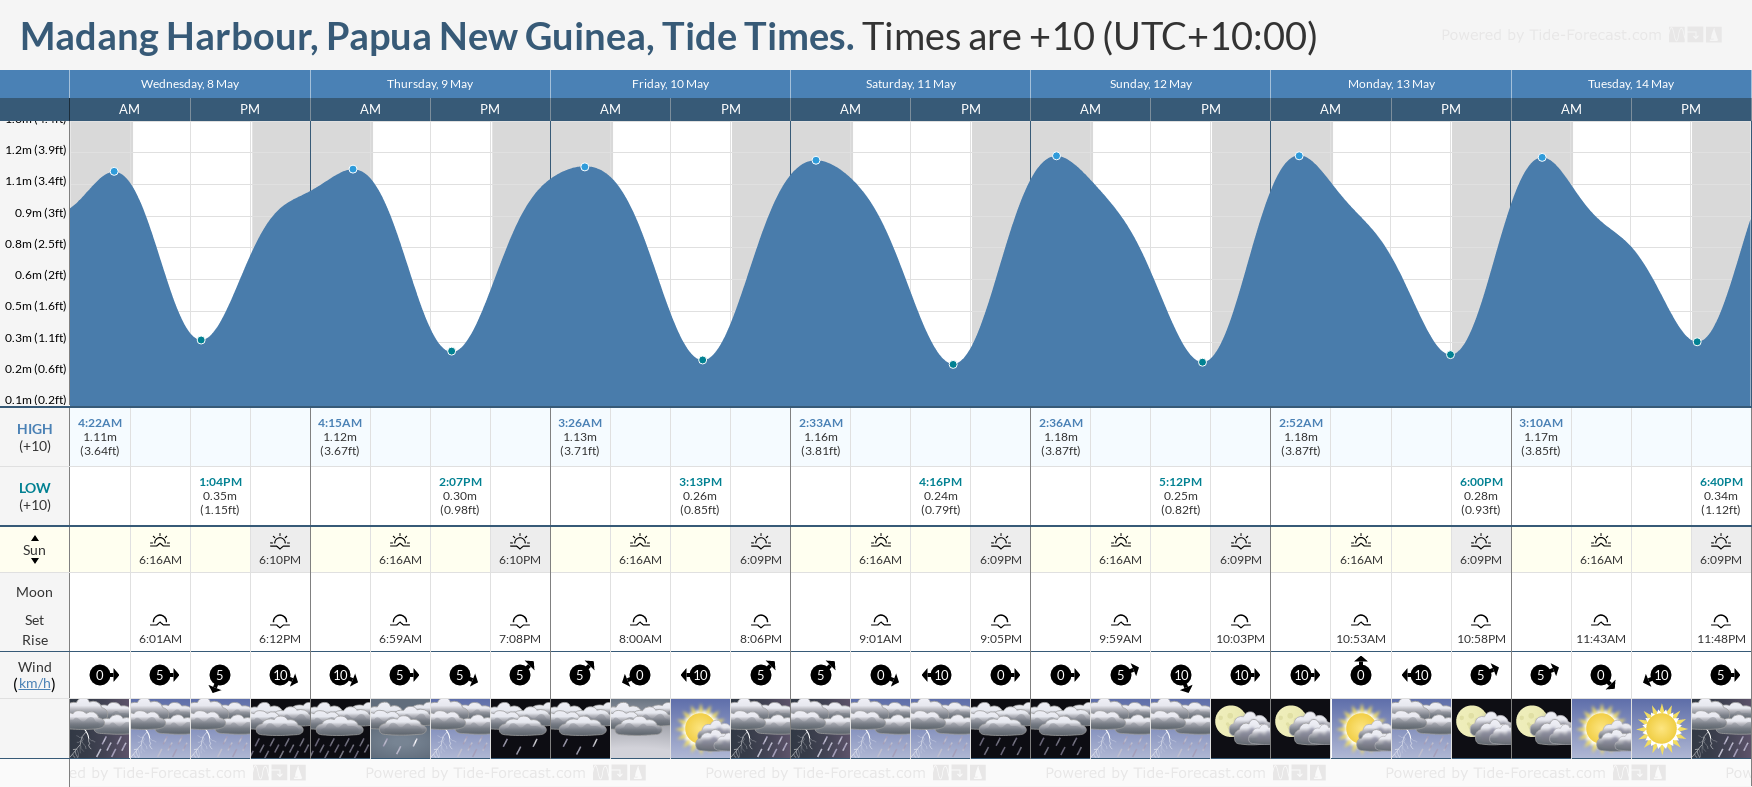 Madang Harbour, Papua New Guinea Tide Chart including high and low tide tide times for the next 7 days